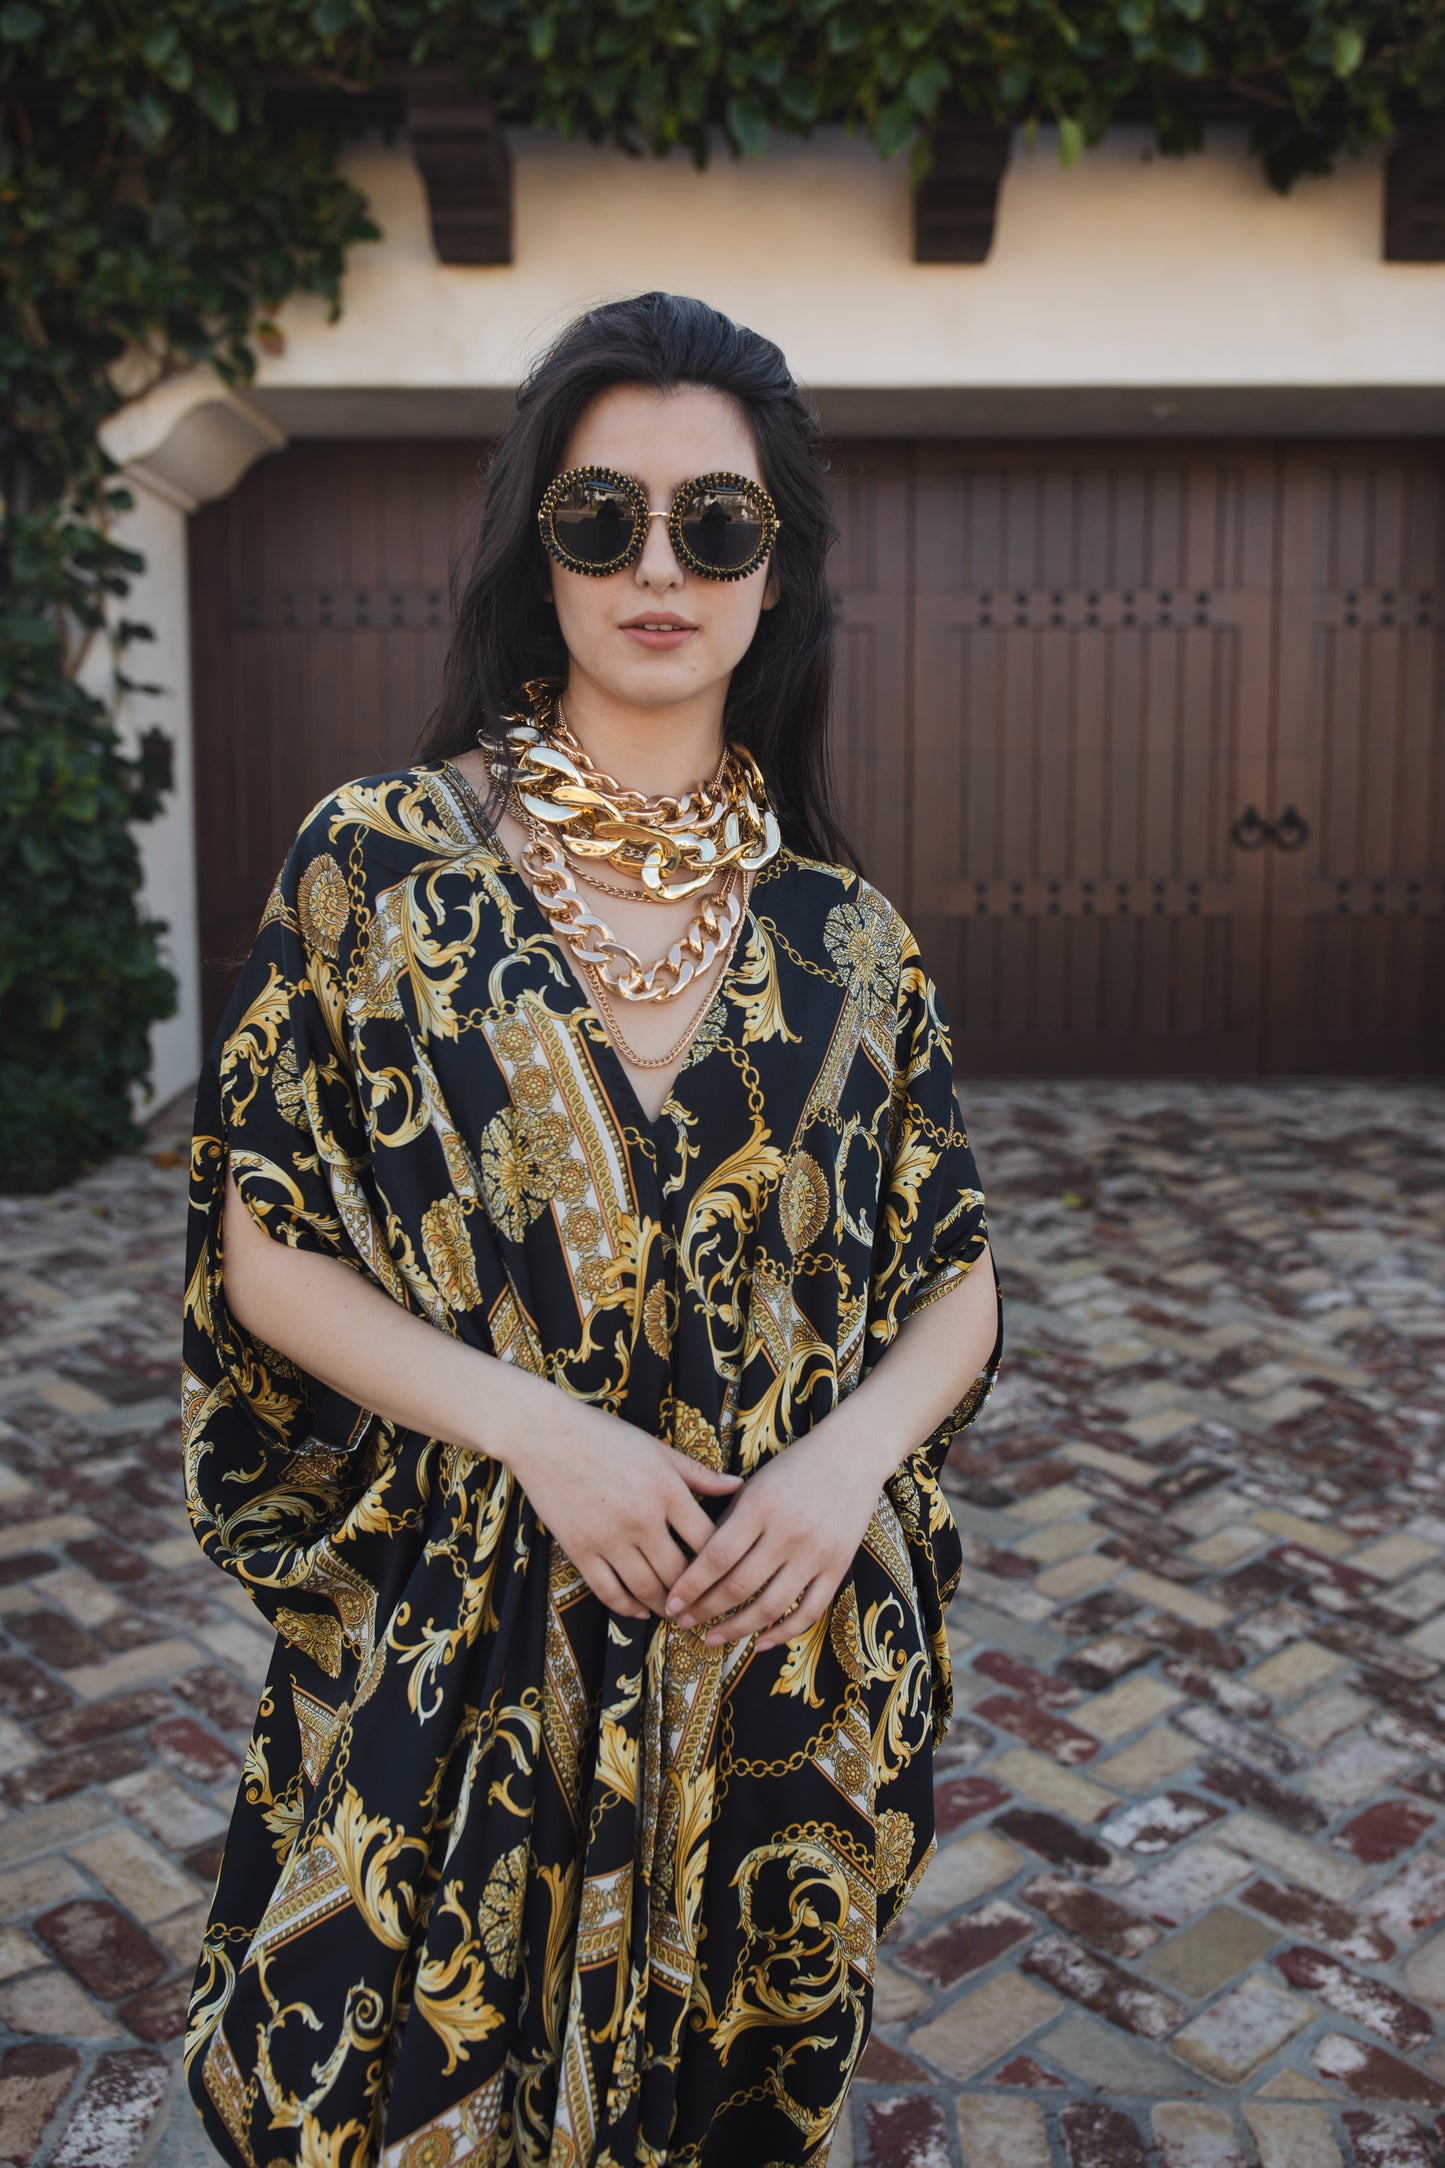 Opaque black caftan dress featuring yellow gold ornamental filigree patterned design. Featuring a deep v-neckline, short batwing sleeves, and an ankle-length hem. This caftan is a voluminous garment that gives a flowy silhouette that drapes beautifully on all shapes.